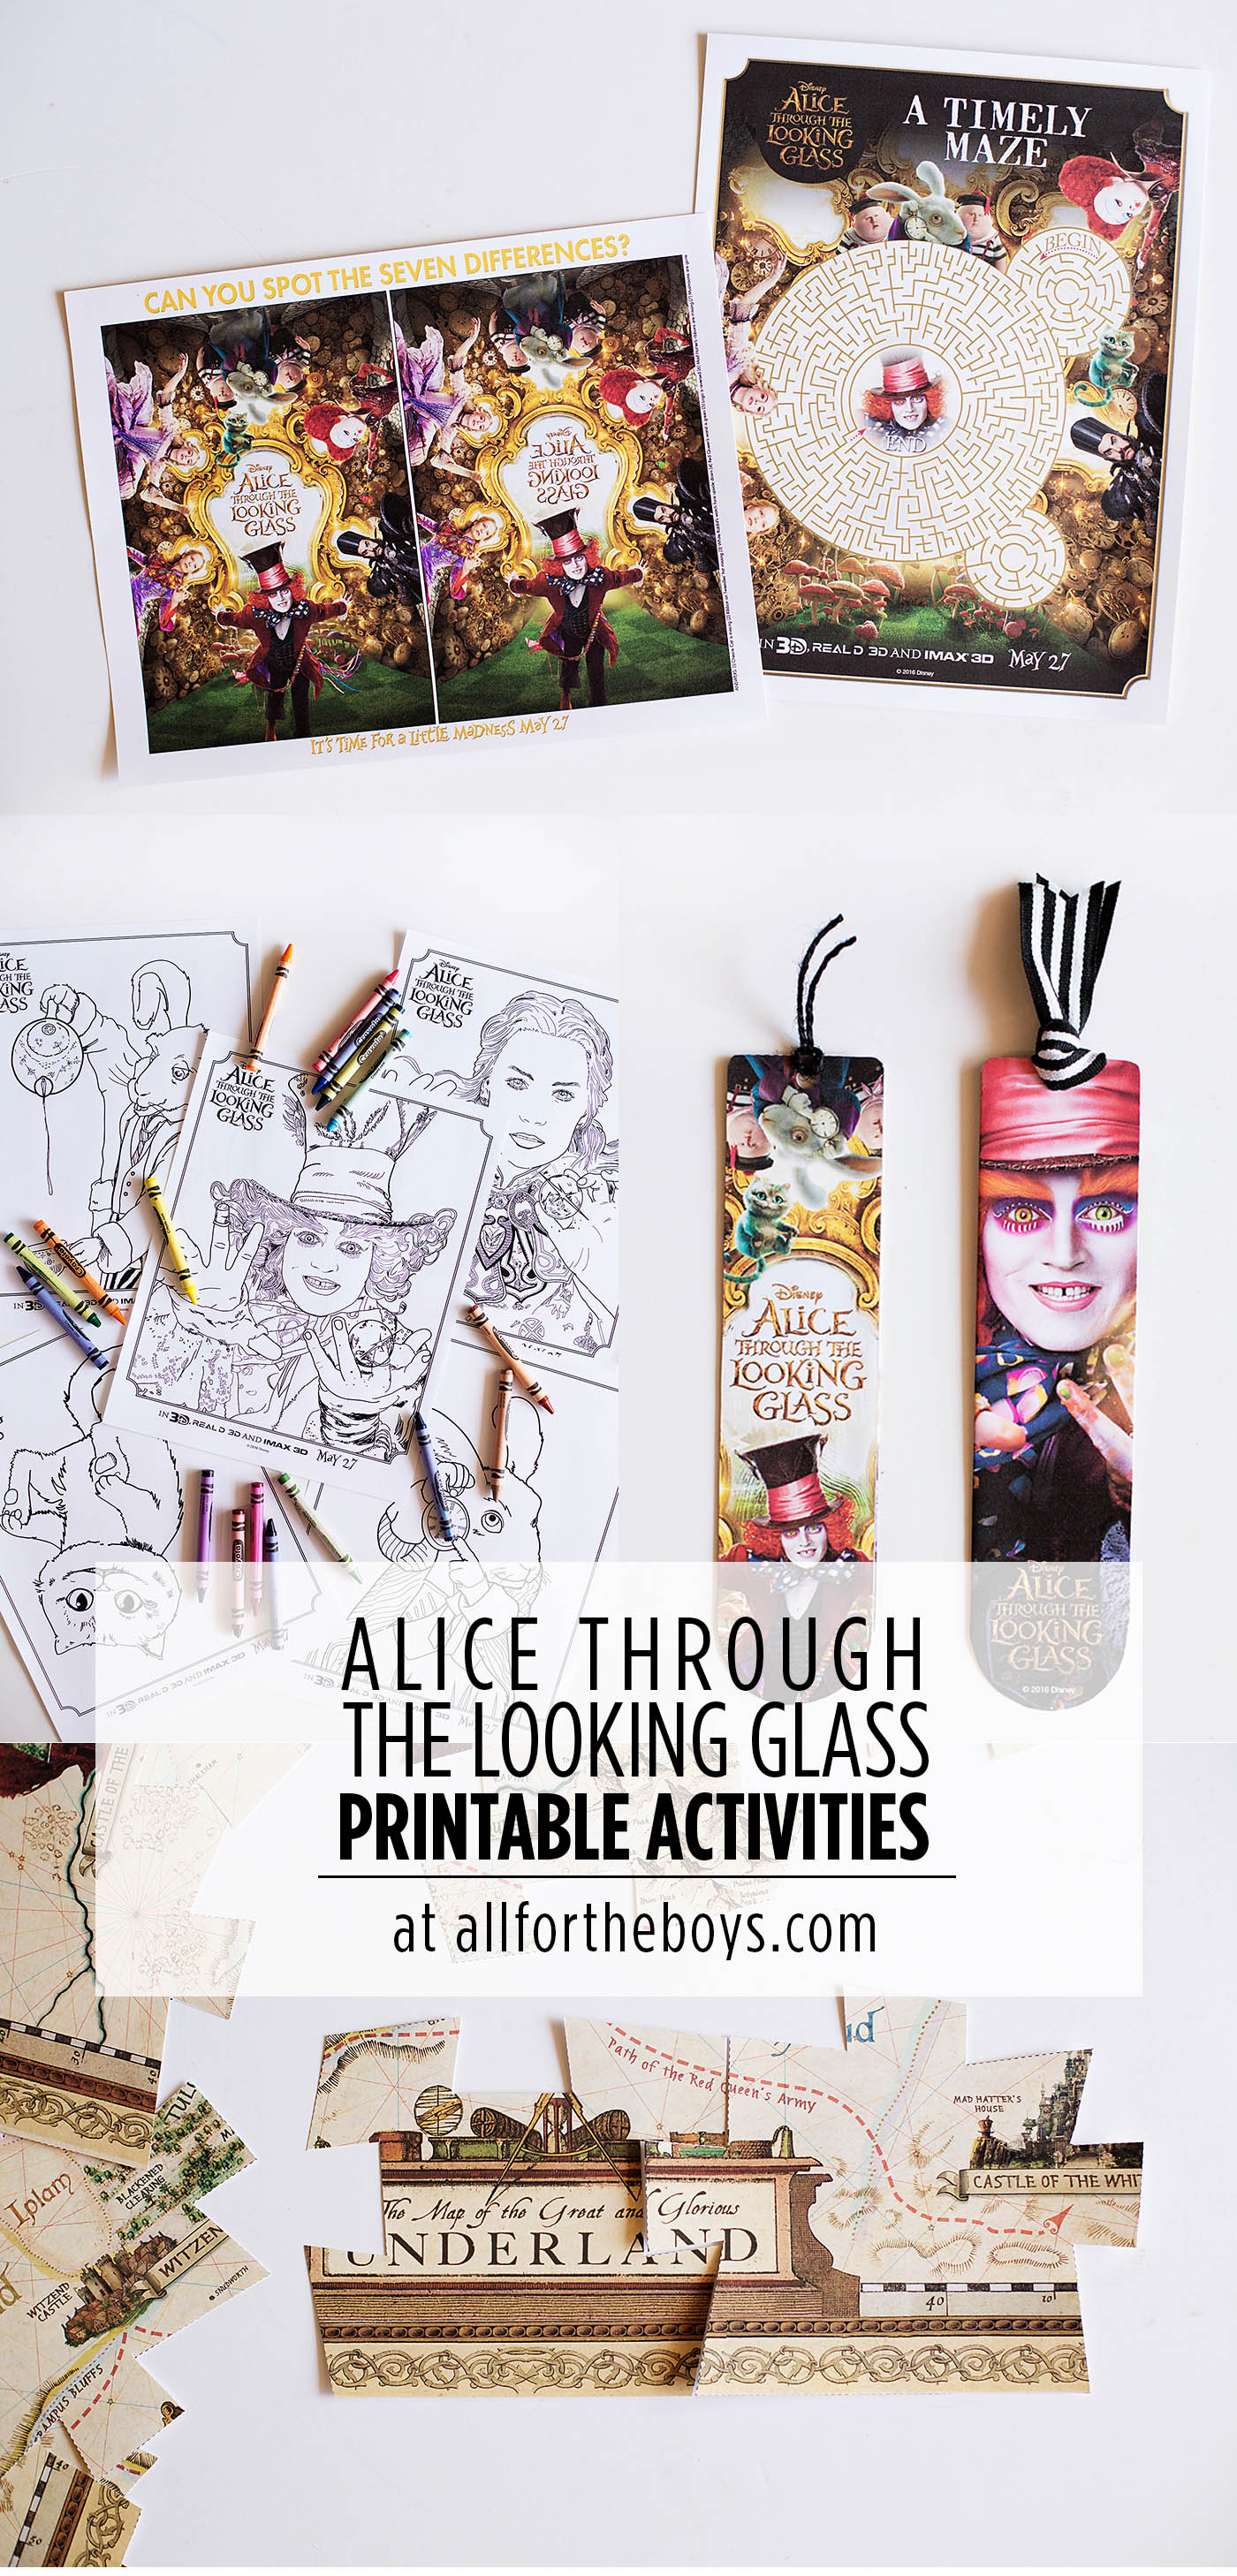 Disney's Alice Through the Looking Glass printable activities including a maze, find the difference, coloring pages, a giant floor puzzle and bookmarks!